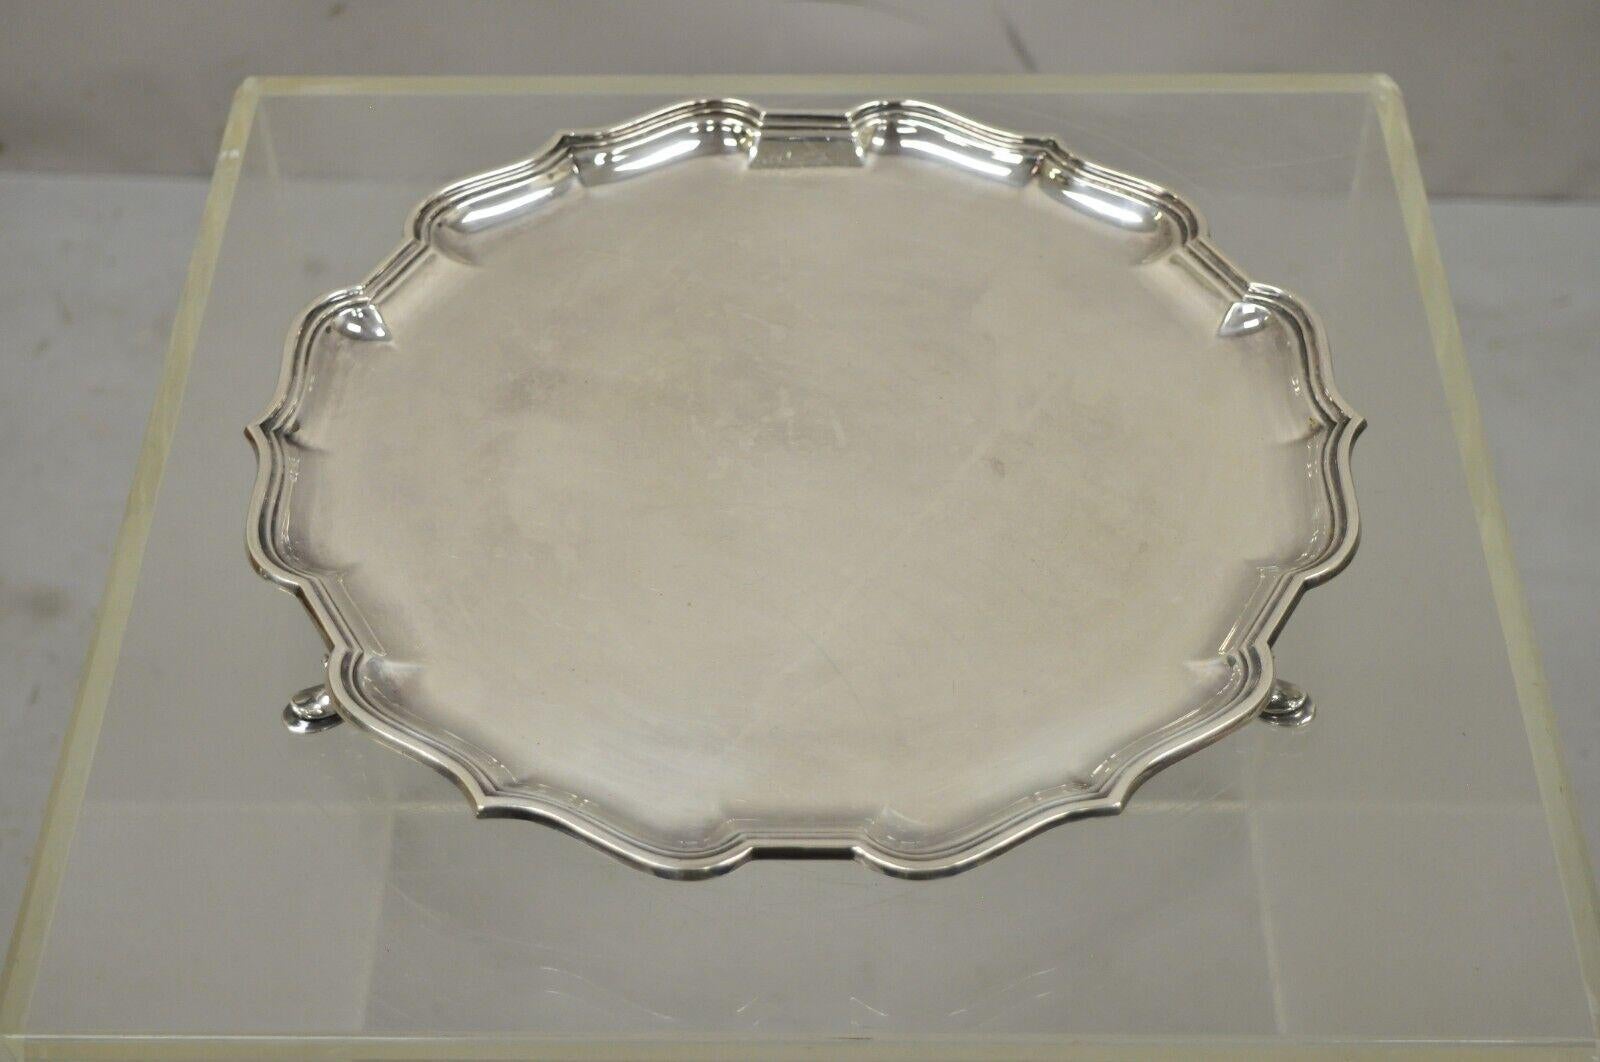 Roberts & Belk England Silver Plate Regency Square Footed Scalloped Tray 3